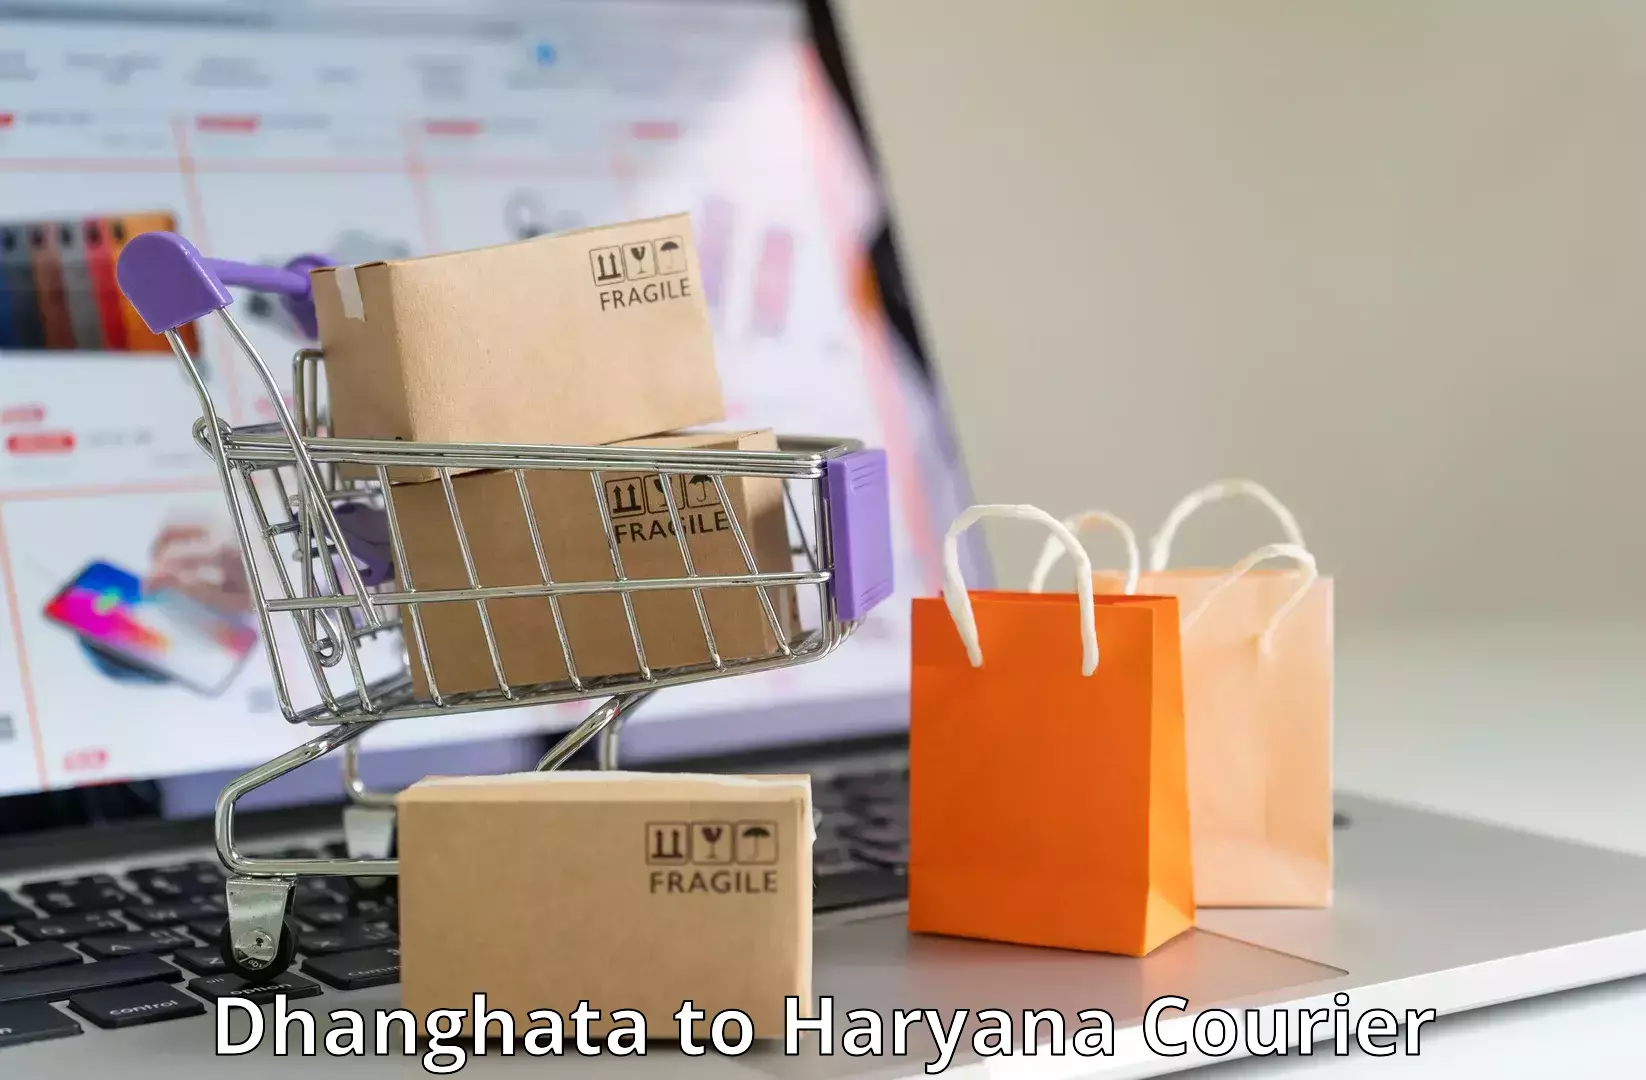 Courier service innovation Dhanghata to Dharuhera